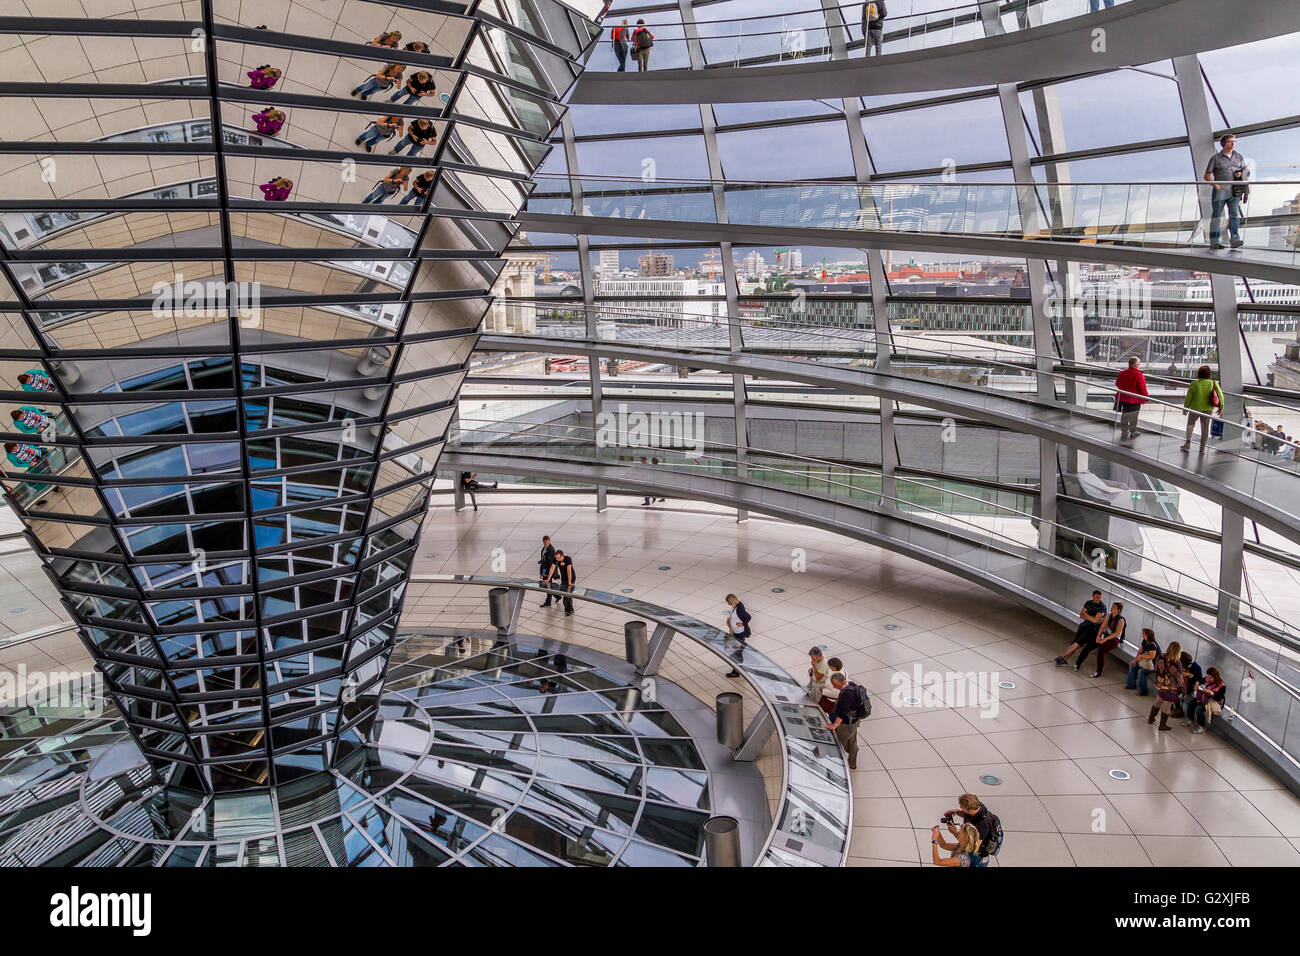 The interior of the glass dome of The Reichstag Building ,which houses the German Bundestag or German Parliament designed by Sir Norman Foster, Berlin Stock Photo